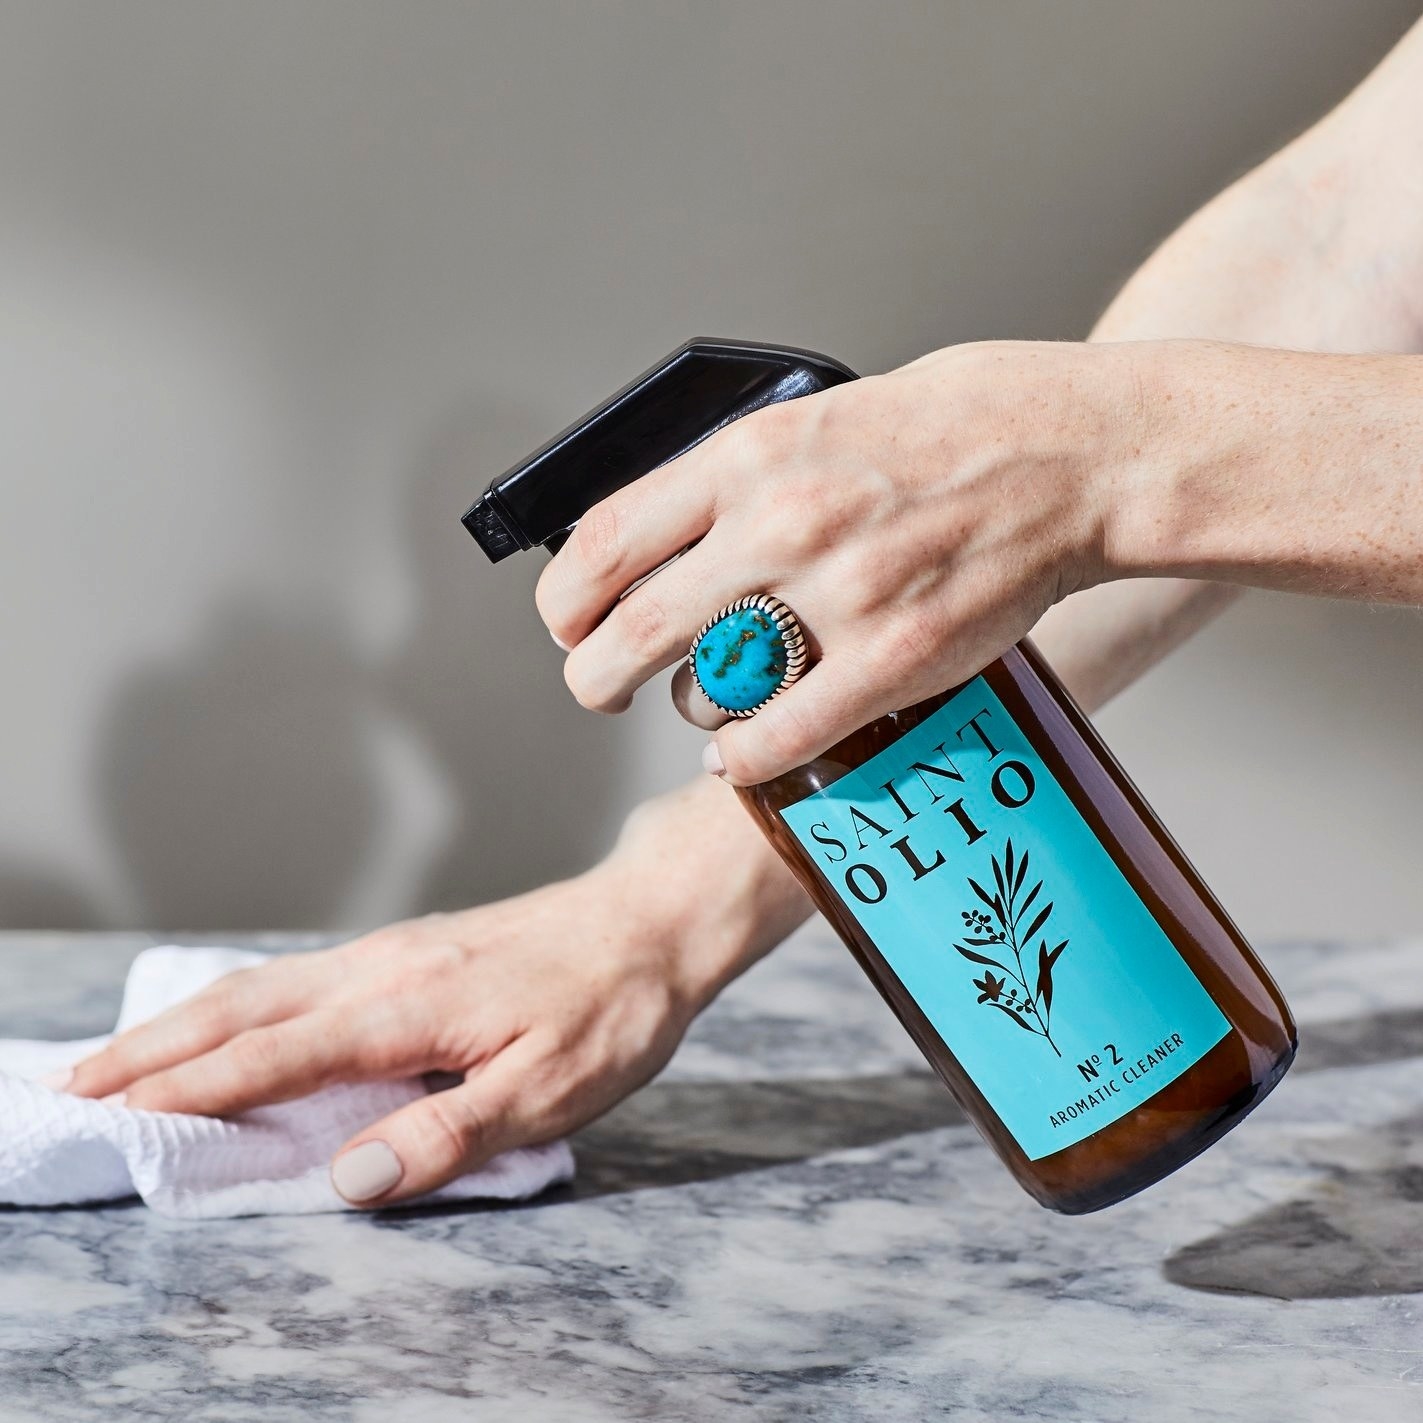 A person's hand uses a bottle of the cleaner to clean a marble surface